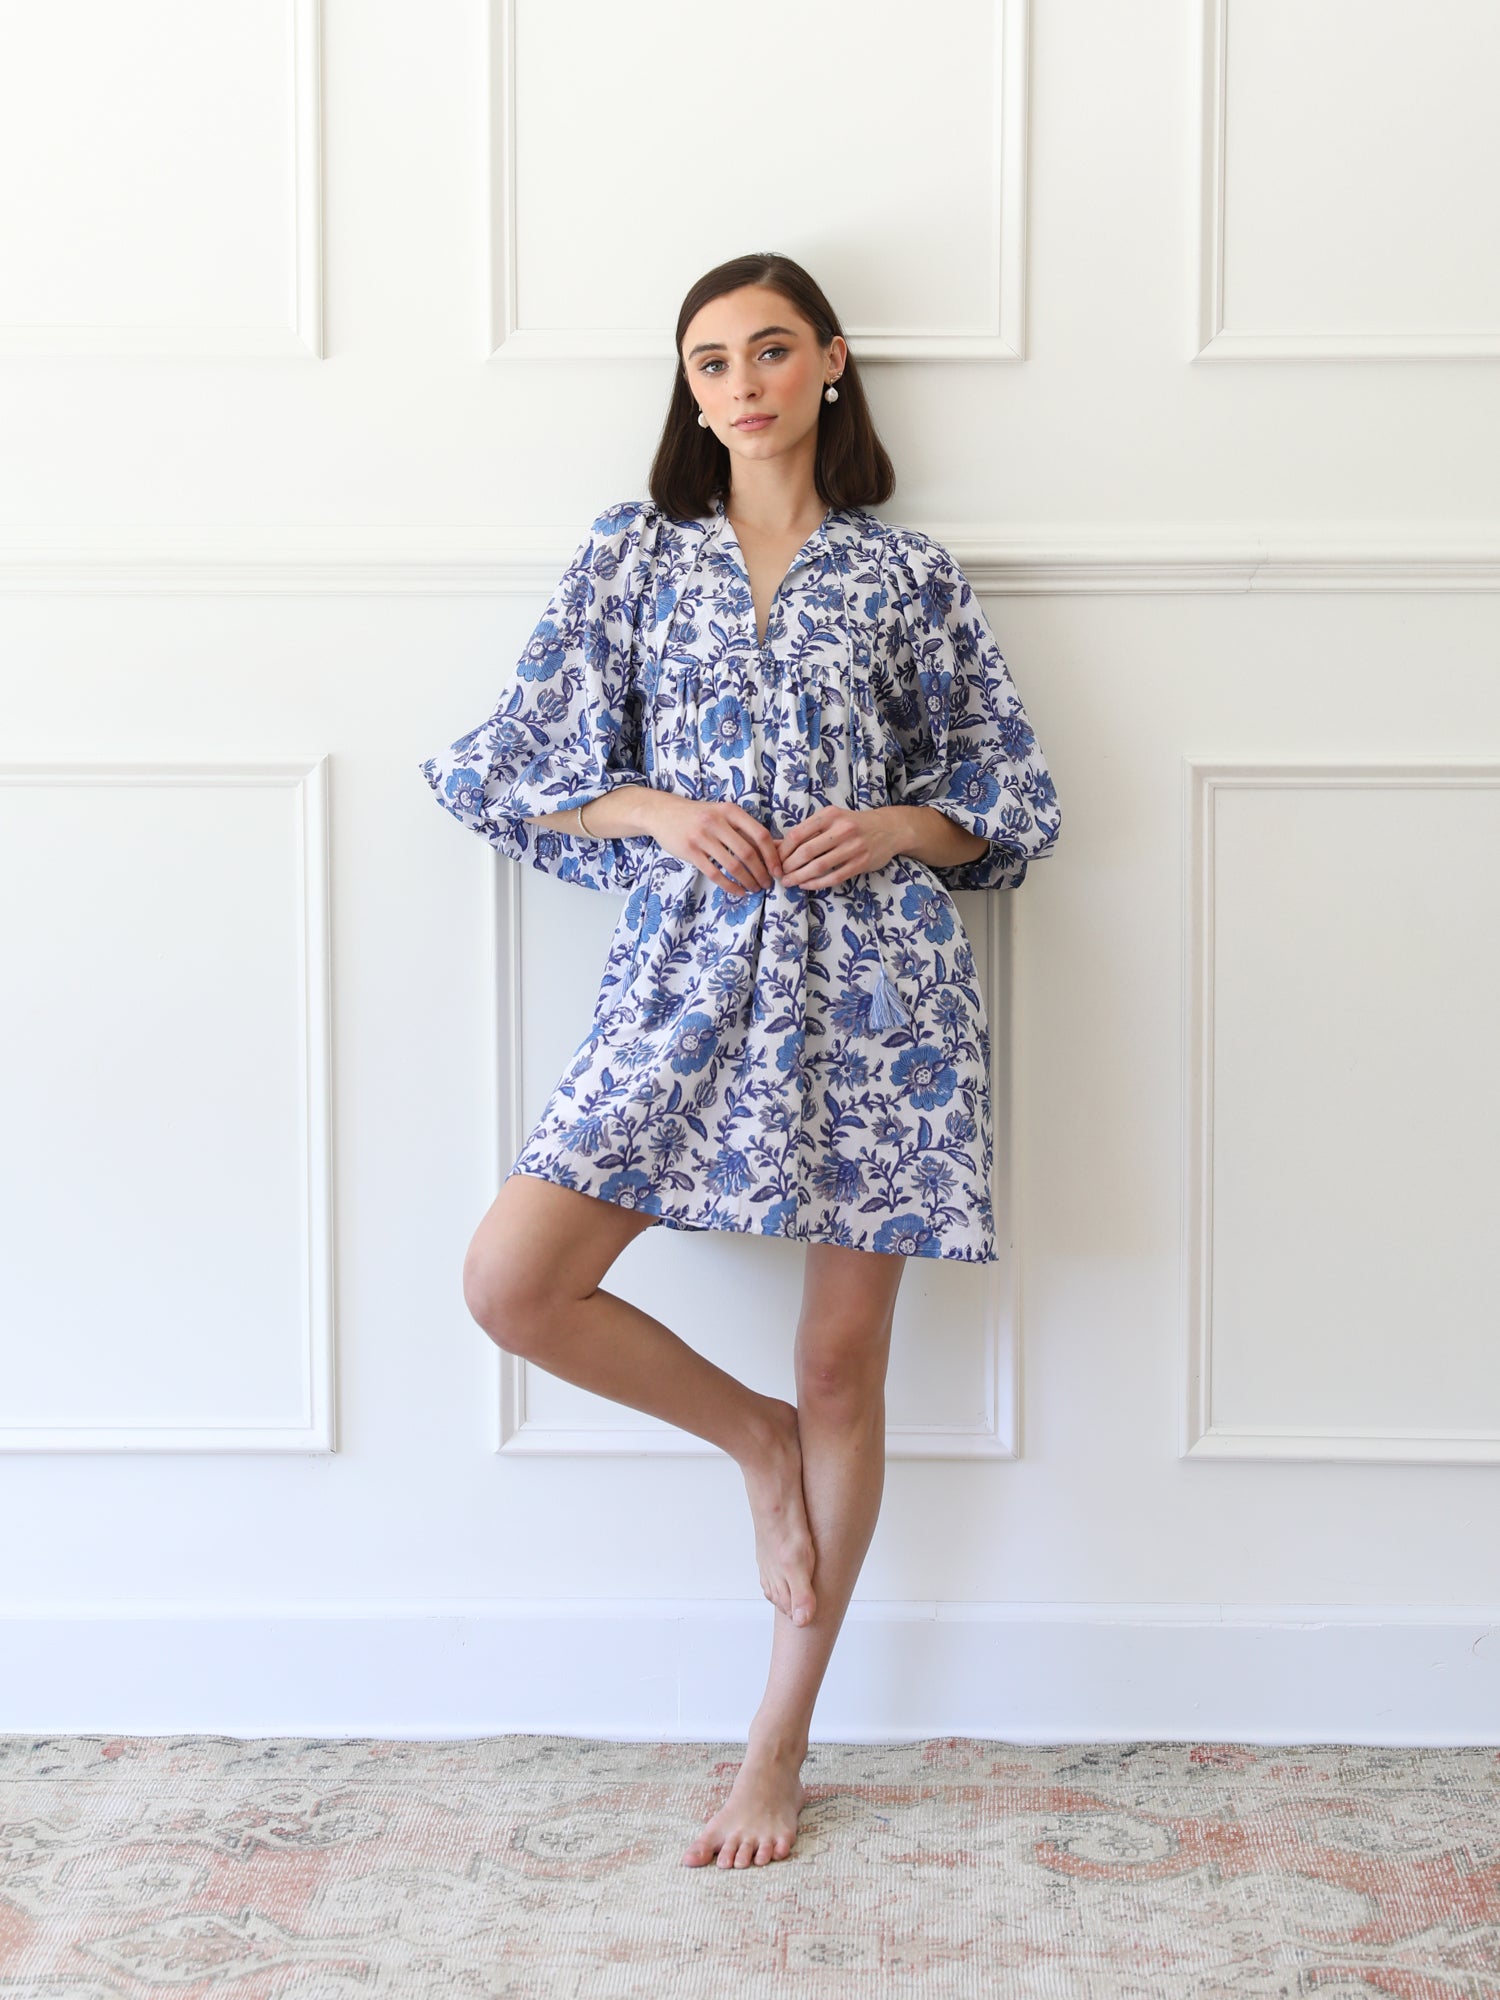 MILLE Clothing Daisy Dress in Blue Floral